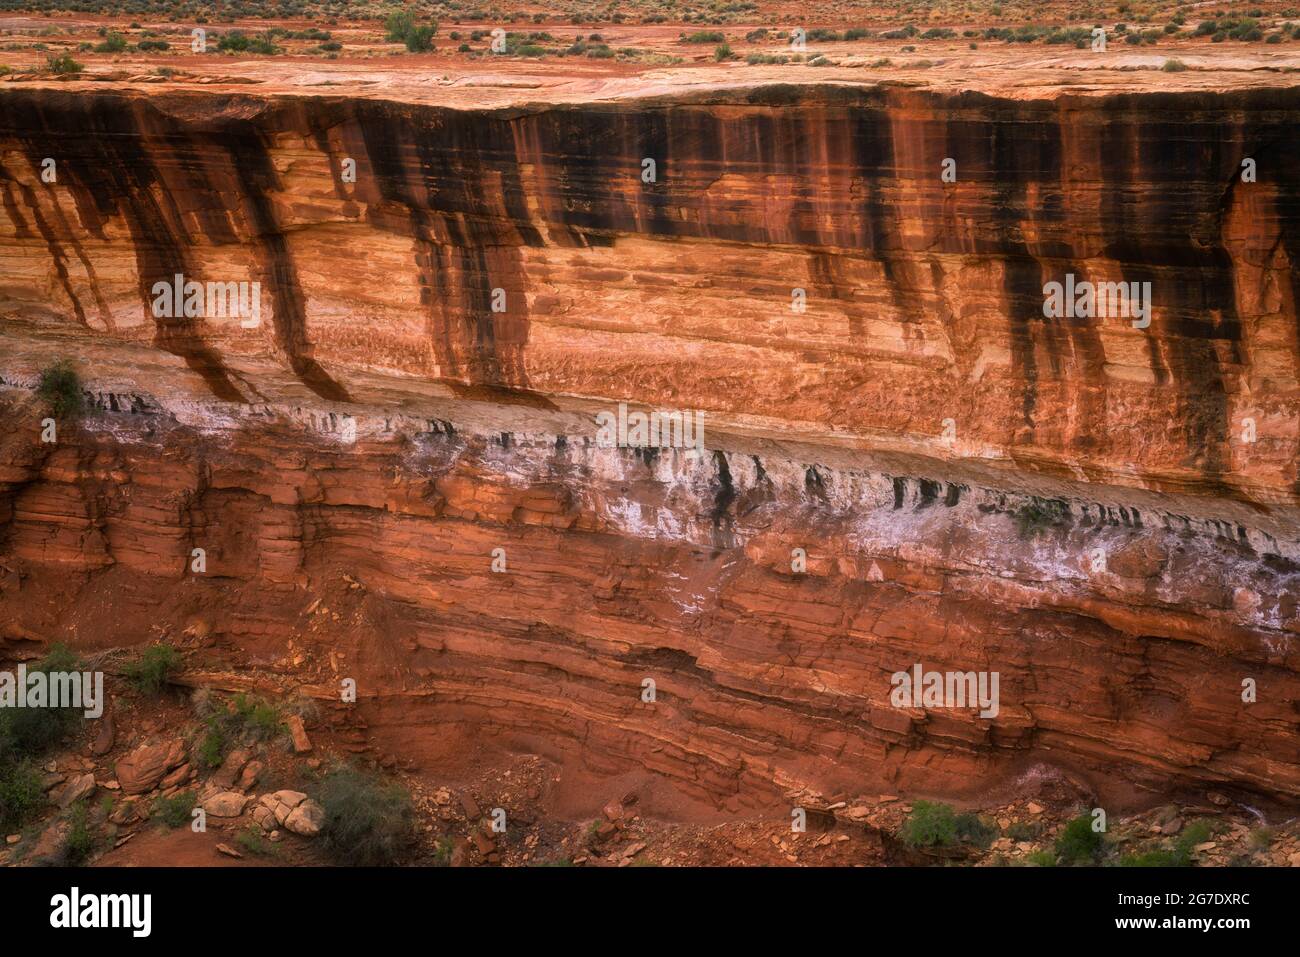 Unique patterns of desert varnish cover many of the canyon walls along the remote White Rim Road in Utah’s Canyonlands National Park. Stock Photo